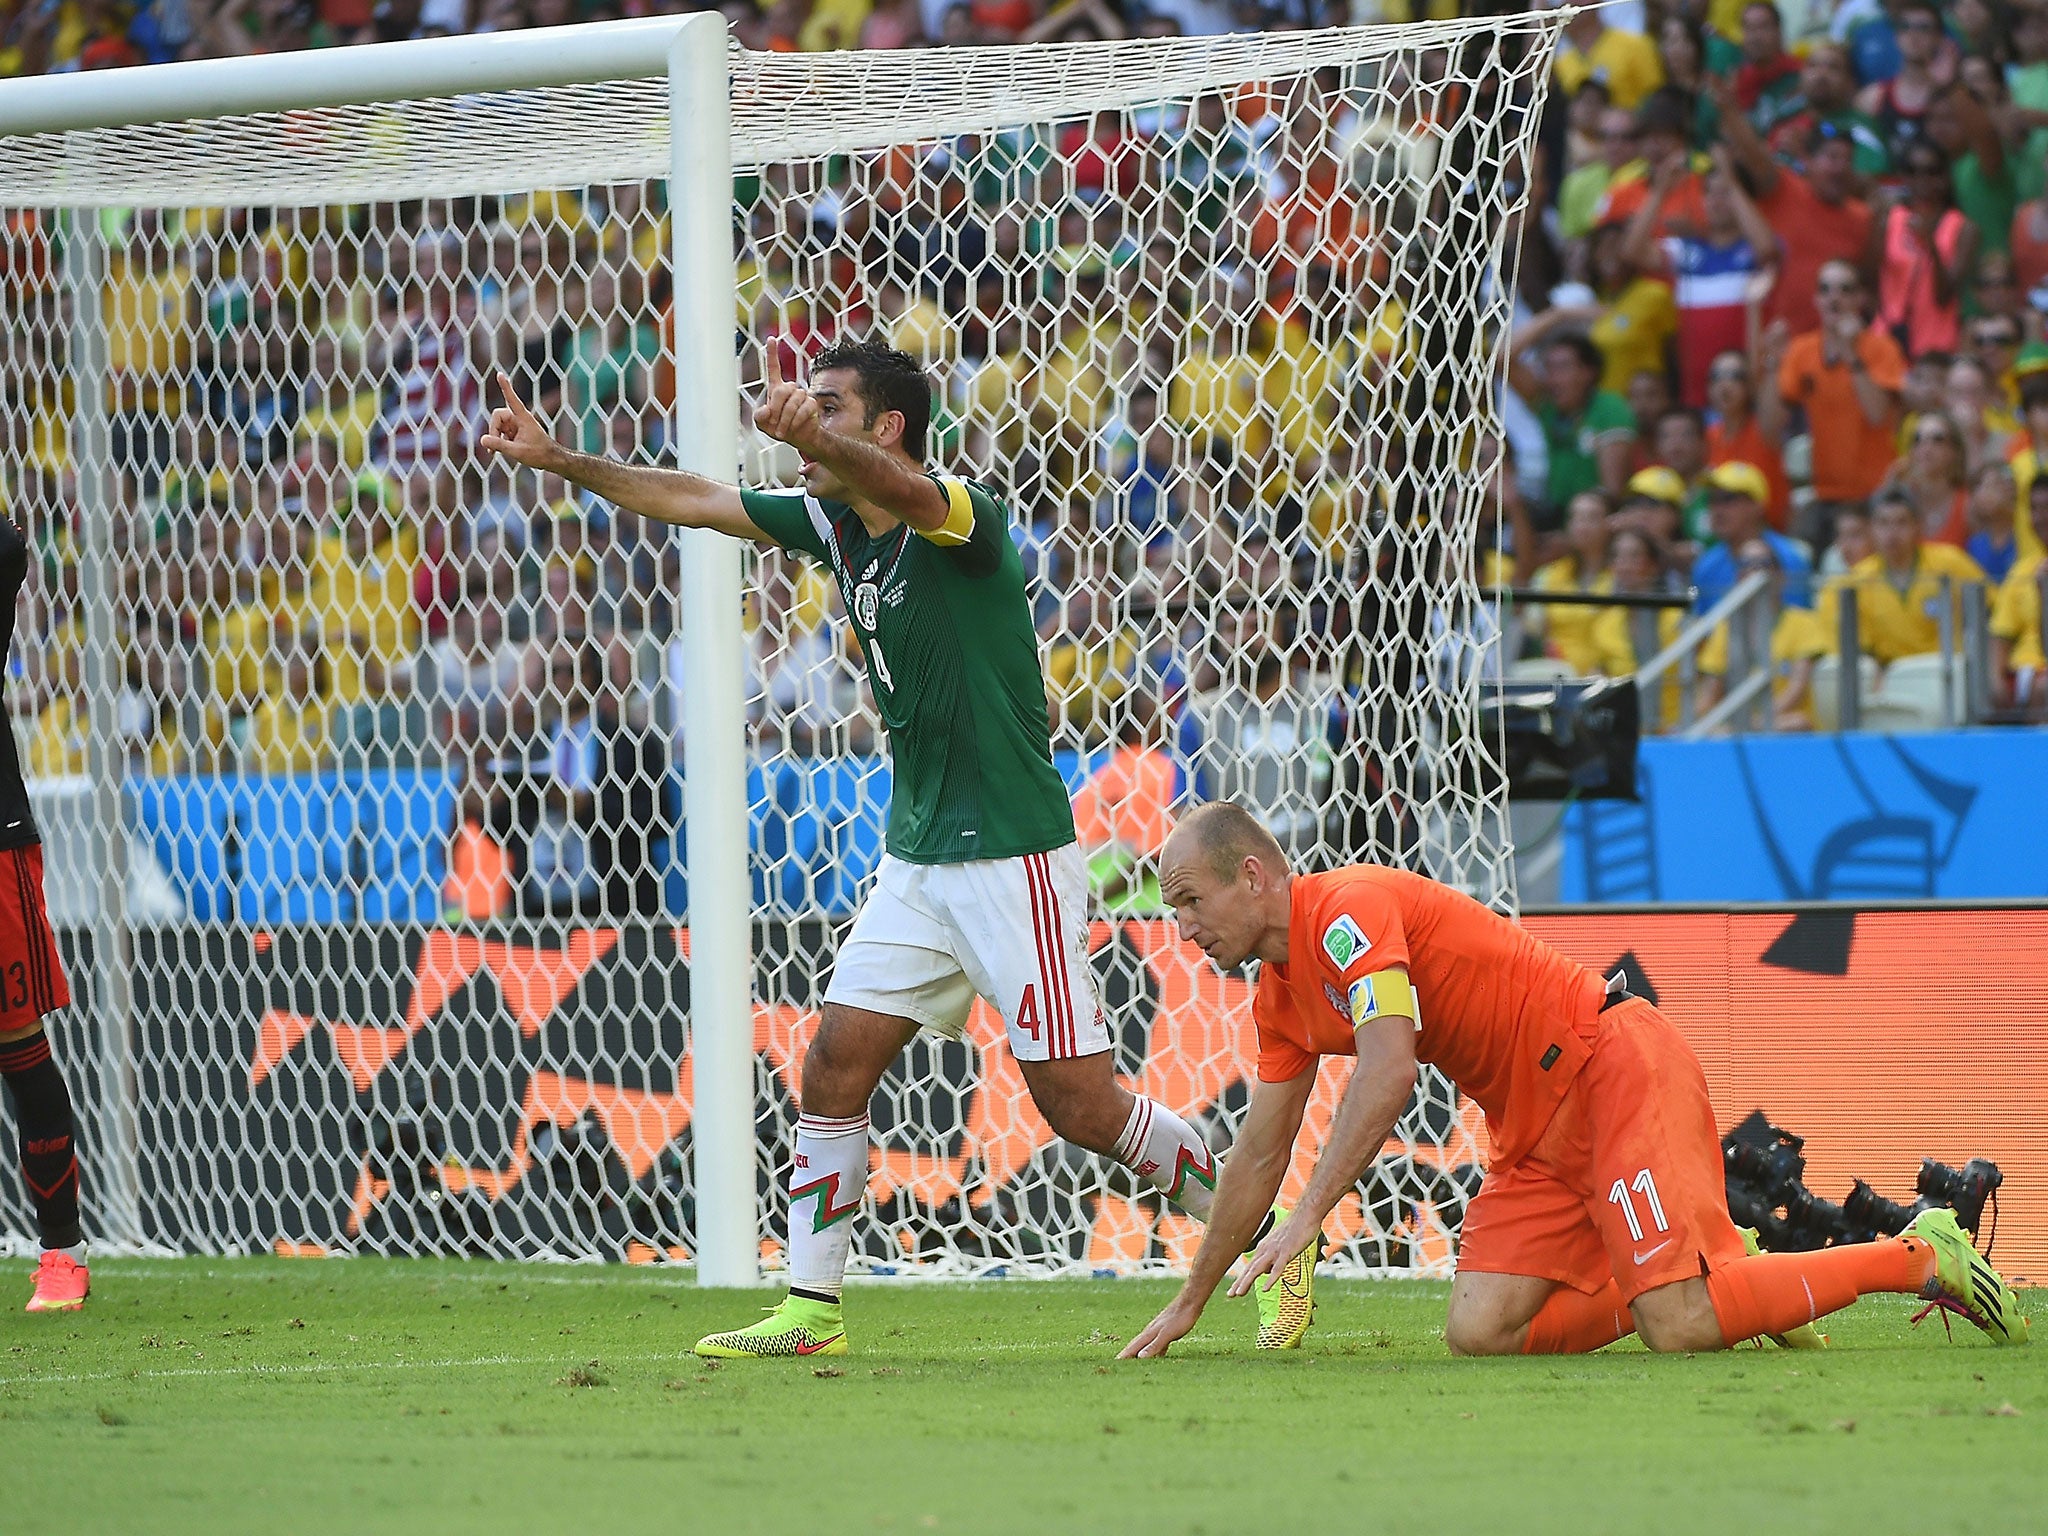 Arjen Robben won a controversial late penalty as the Netherlands beat Mexico in Fortaleza